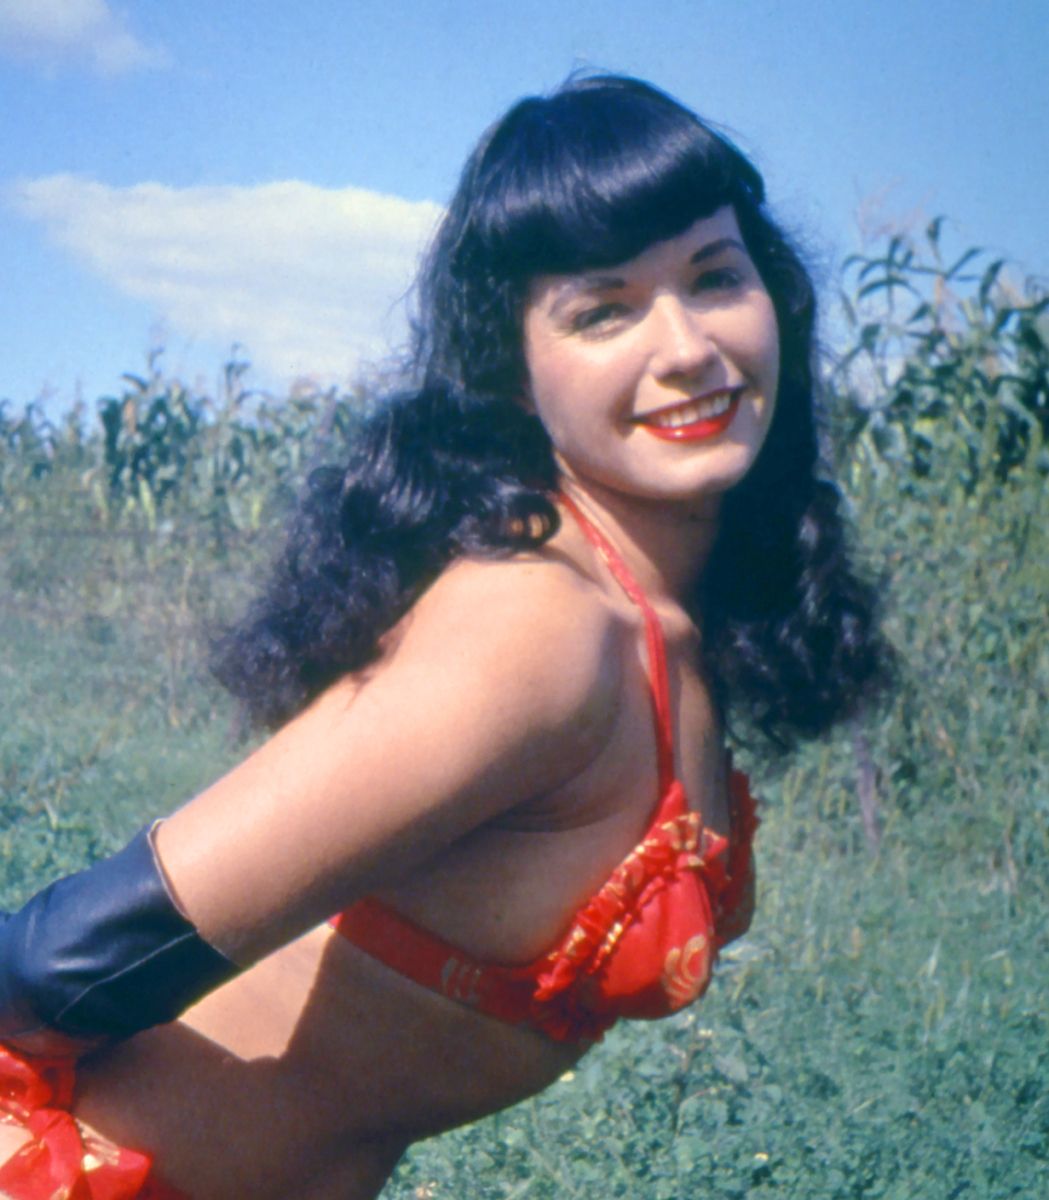 Burlesque dance with betty page